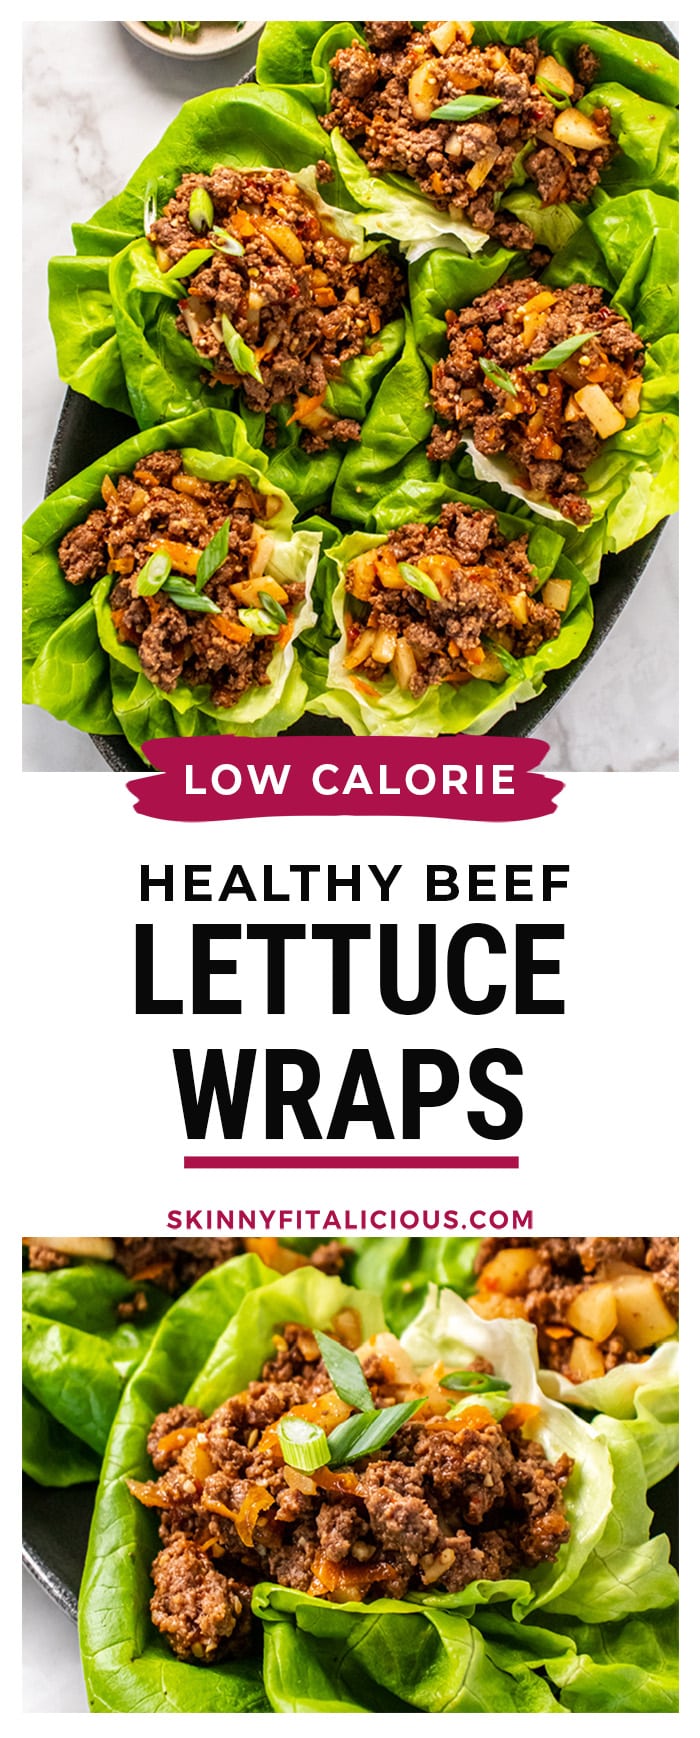 Healthy Ground Beef Lettuce Wraps is a copycat recipe that tastes like the restaurant version you love! A lighter lettuce wrap recipe made with lean ground beef and veggies mixed with a delicious Asian sauce. 